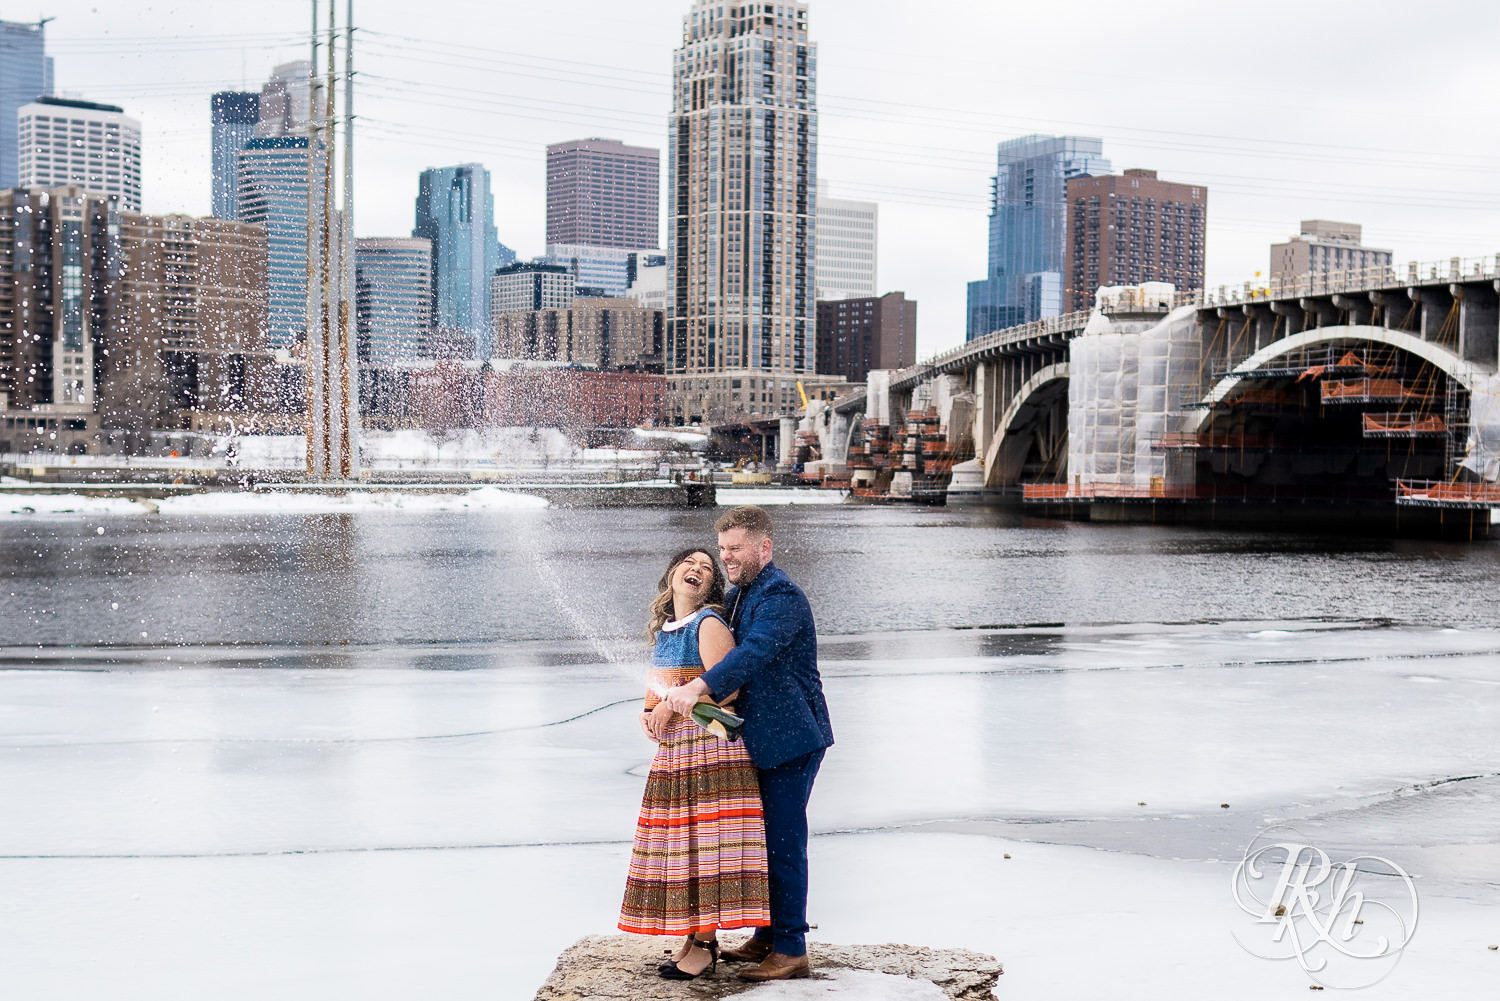 Man and Hmong woman spray champagne in Saint Anthony Main in Minneapolis, Minnesota with city in the background.